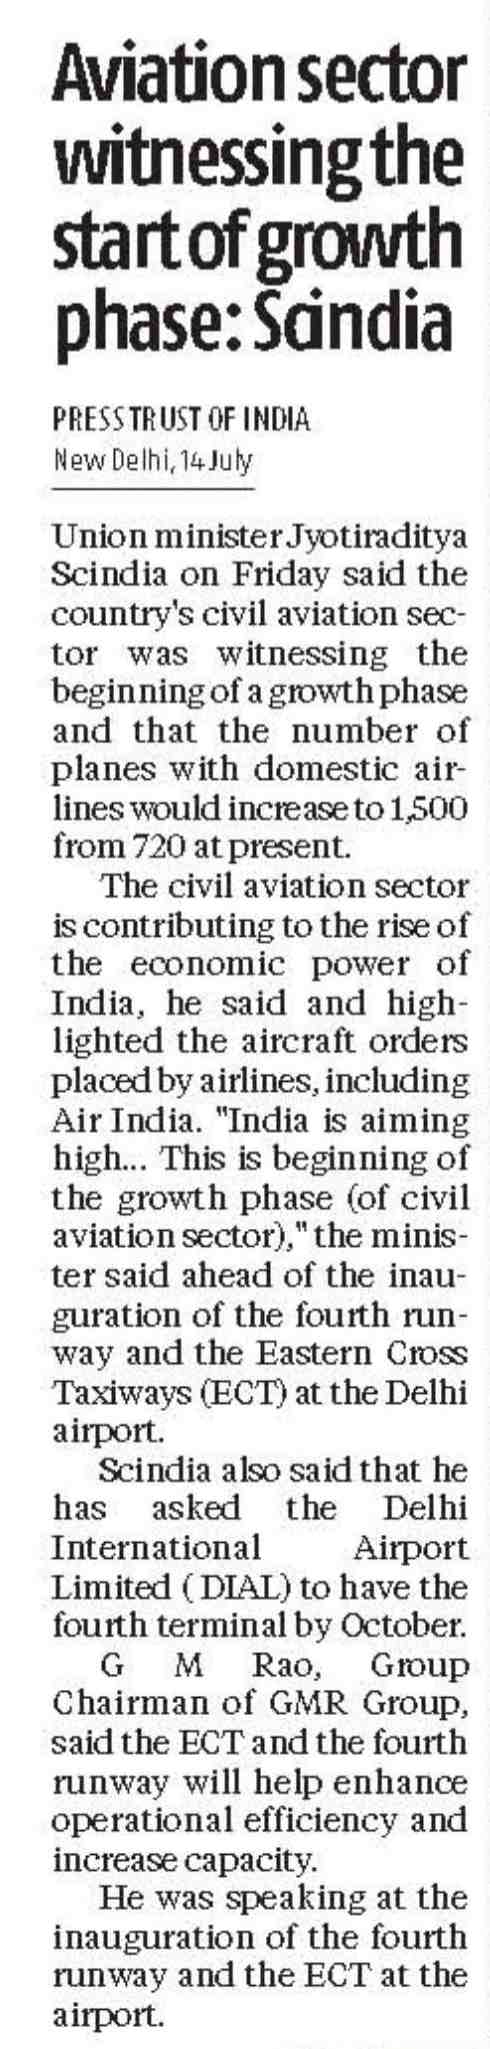 Aviation sector witnessing the start of growth